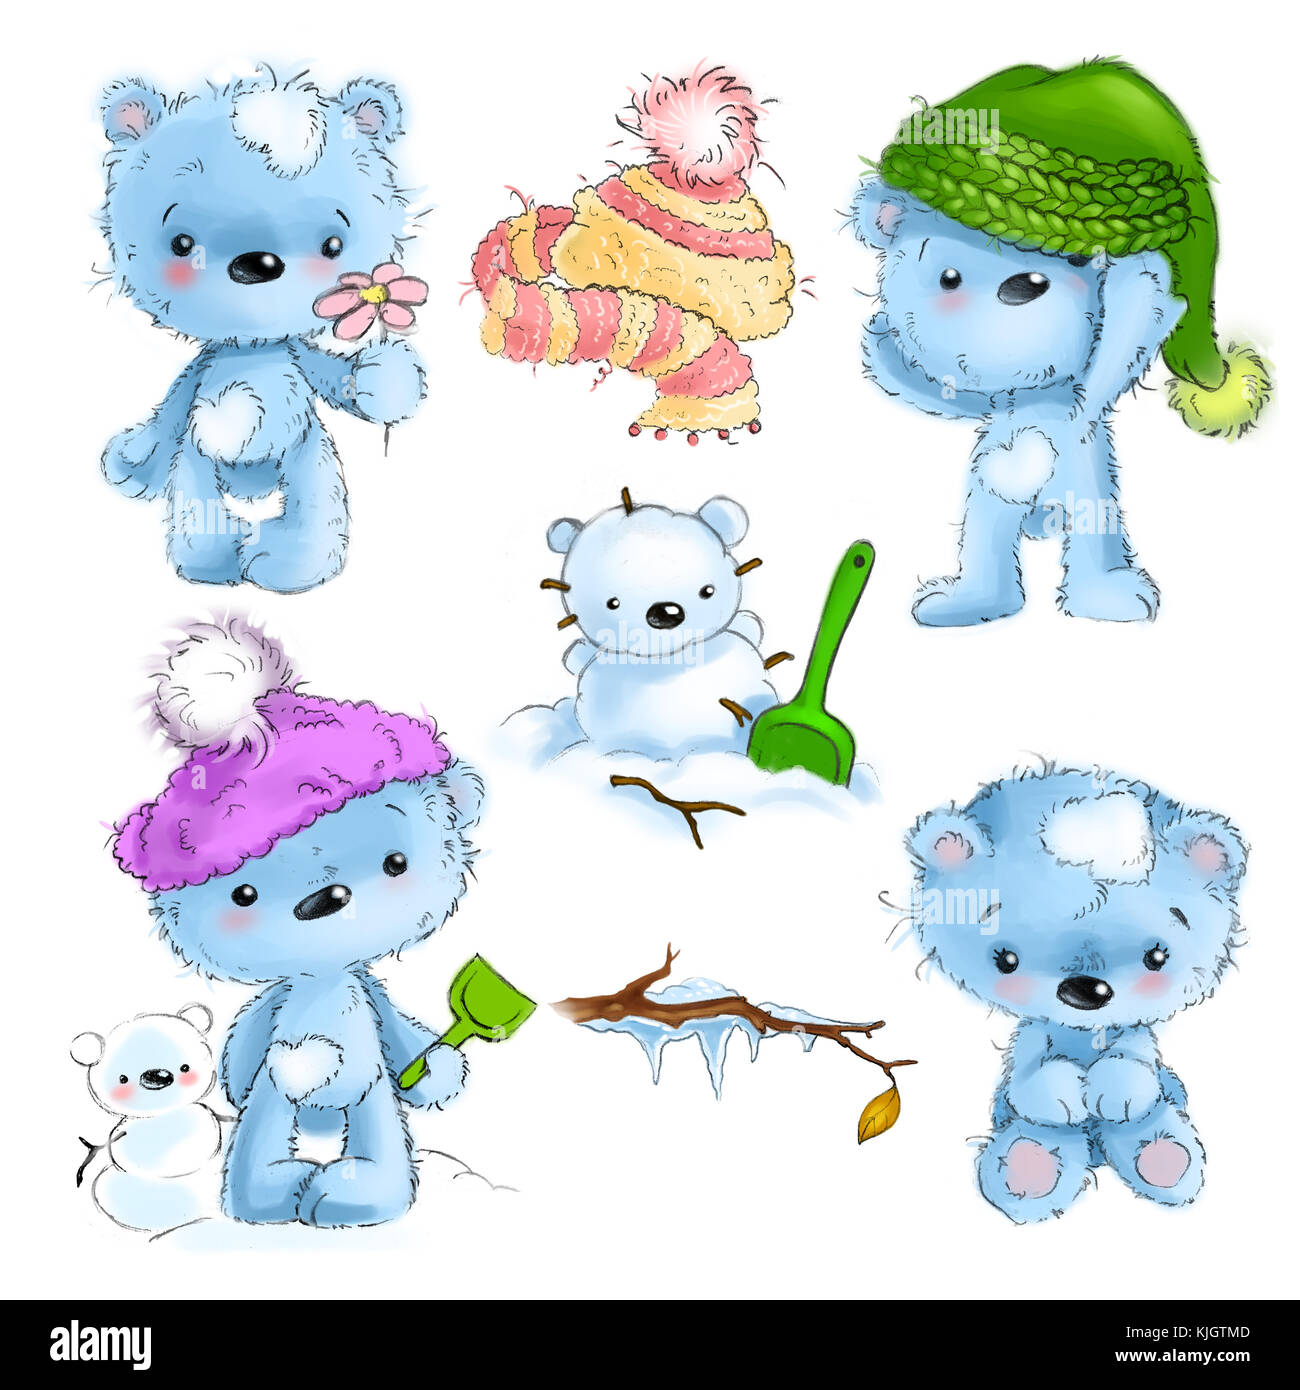 Set of cute teddy bear character standing, sitting, playing, cartoon illustration isolated on white background. Stock Photo